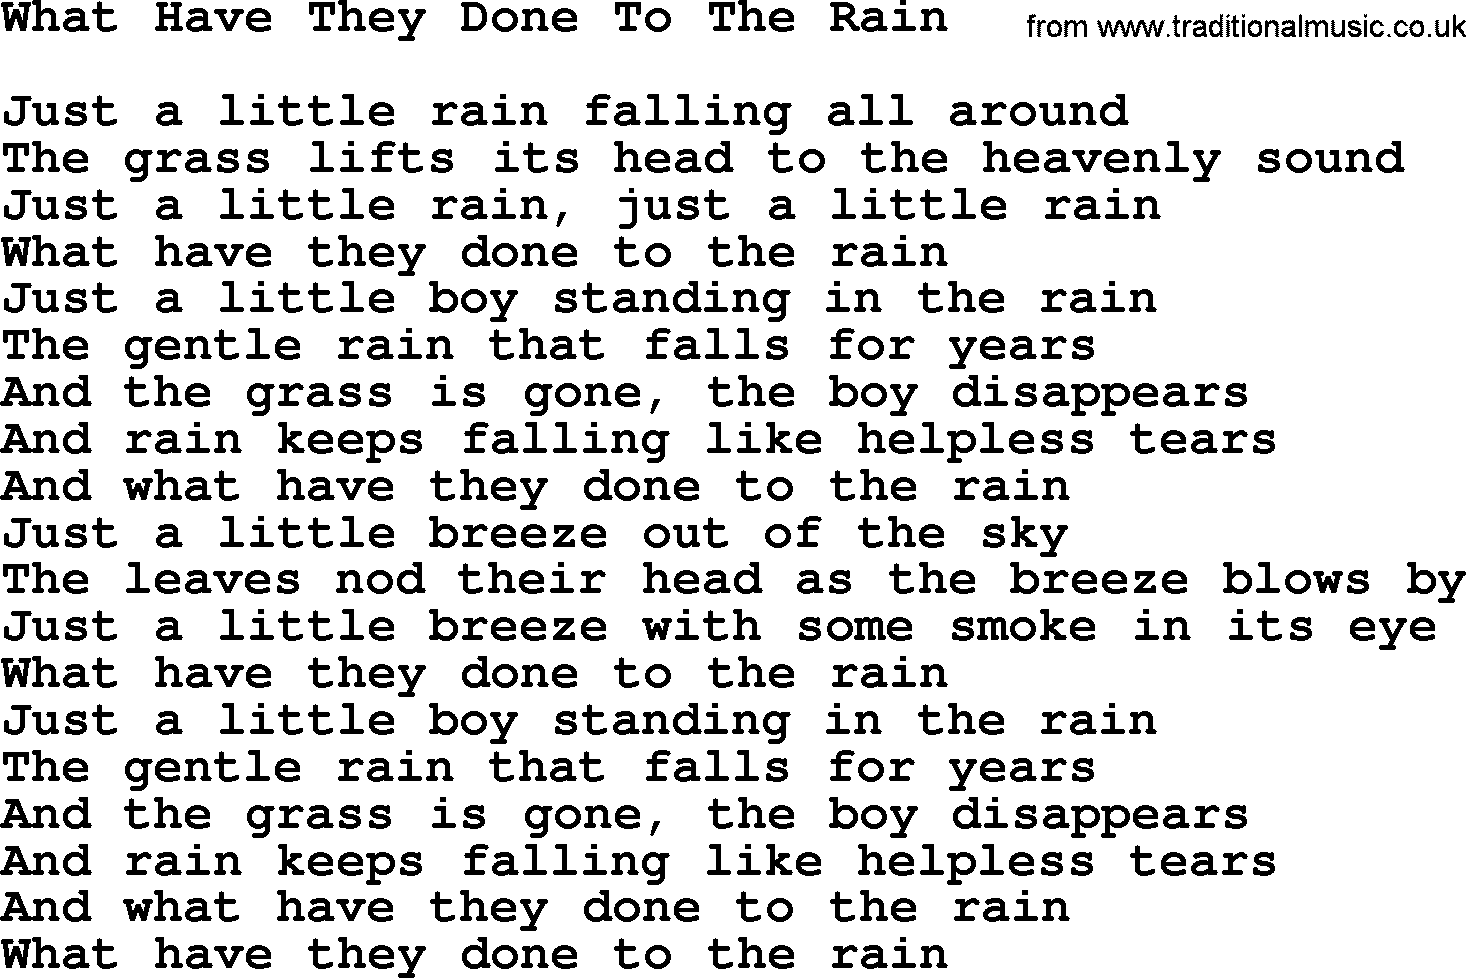 Joan Baez song What Have They Done To The Rain, lyrics